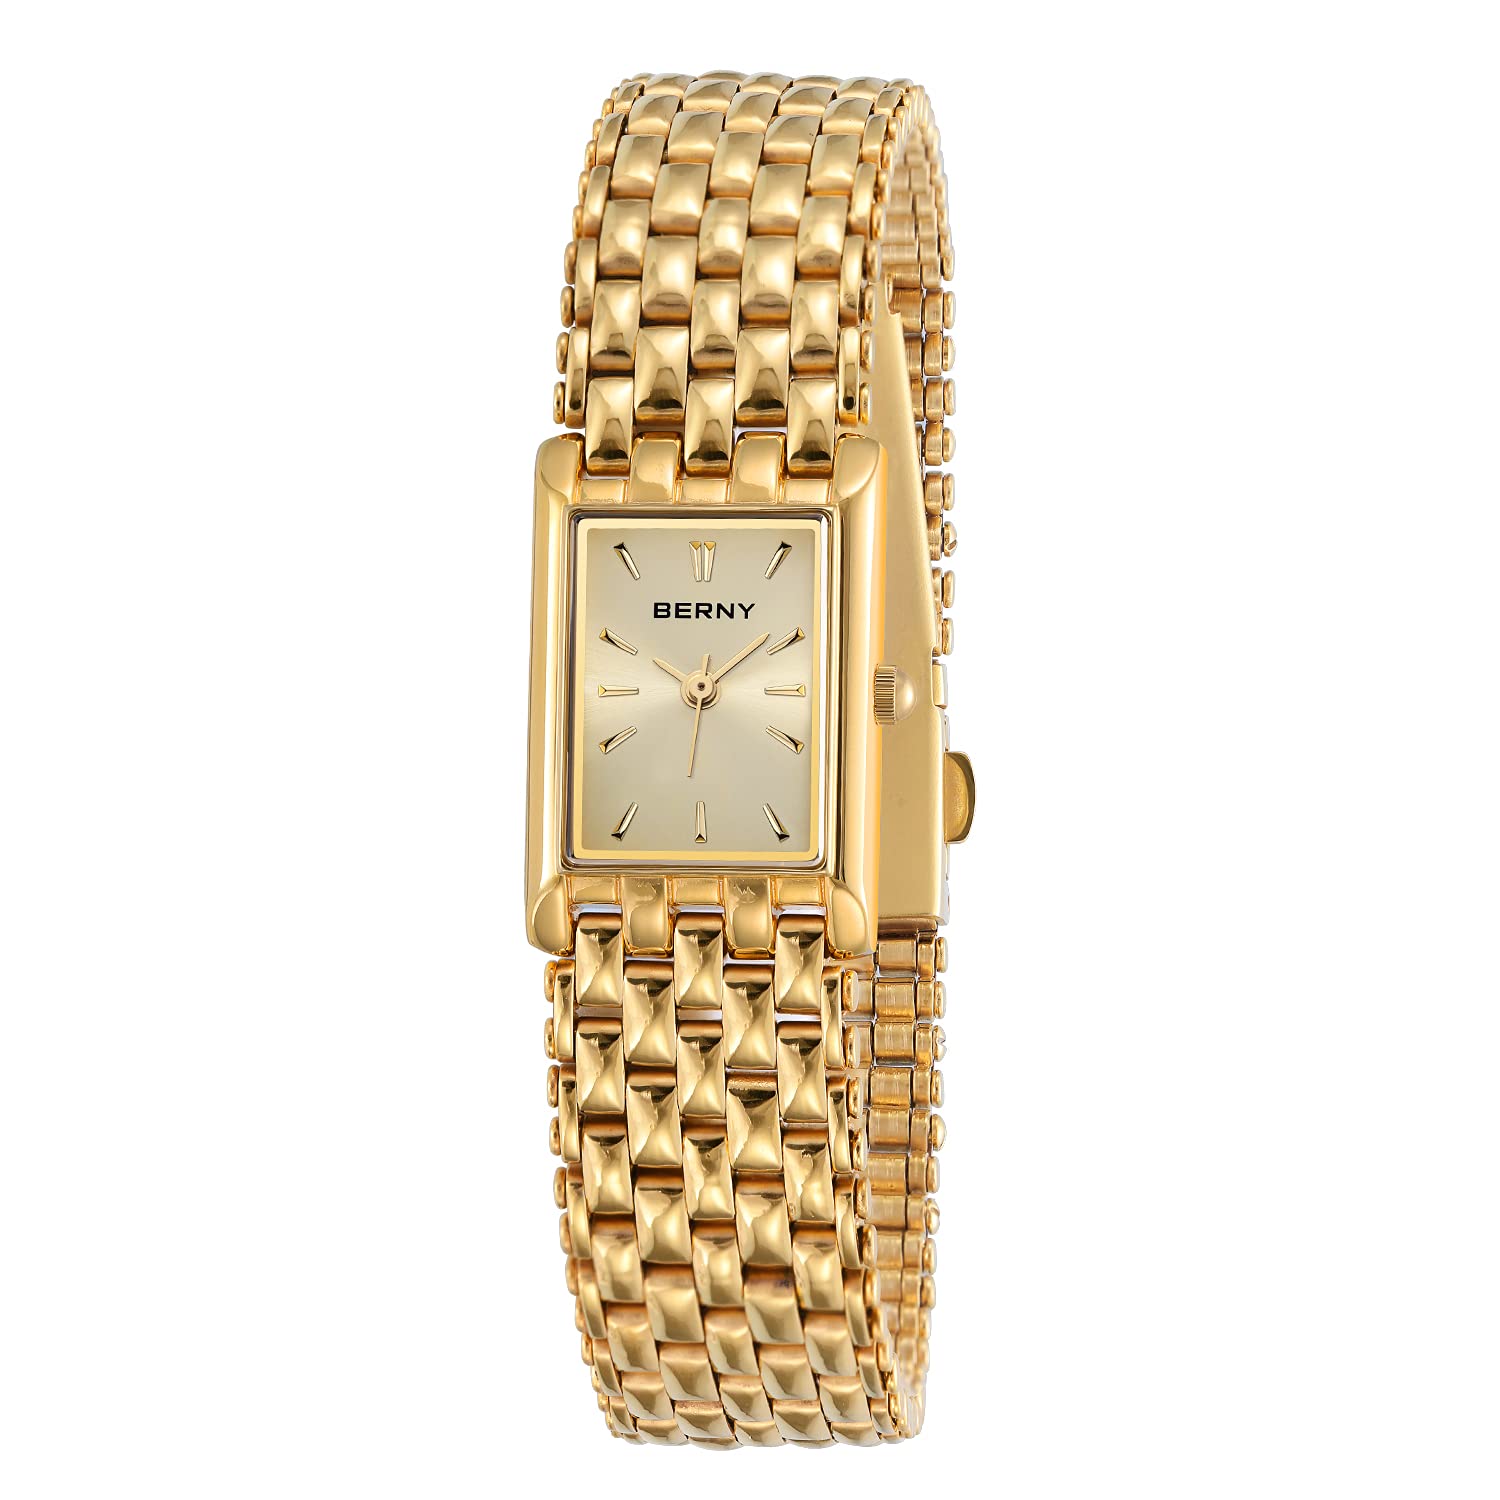 BERNY Gold Watches for Women Ladies Wrist Quartz Watches Stainless Steel Band Womens Gold Watch Small Luxury Casual Fashion B